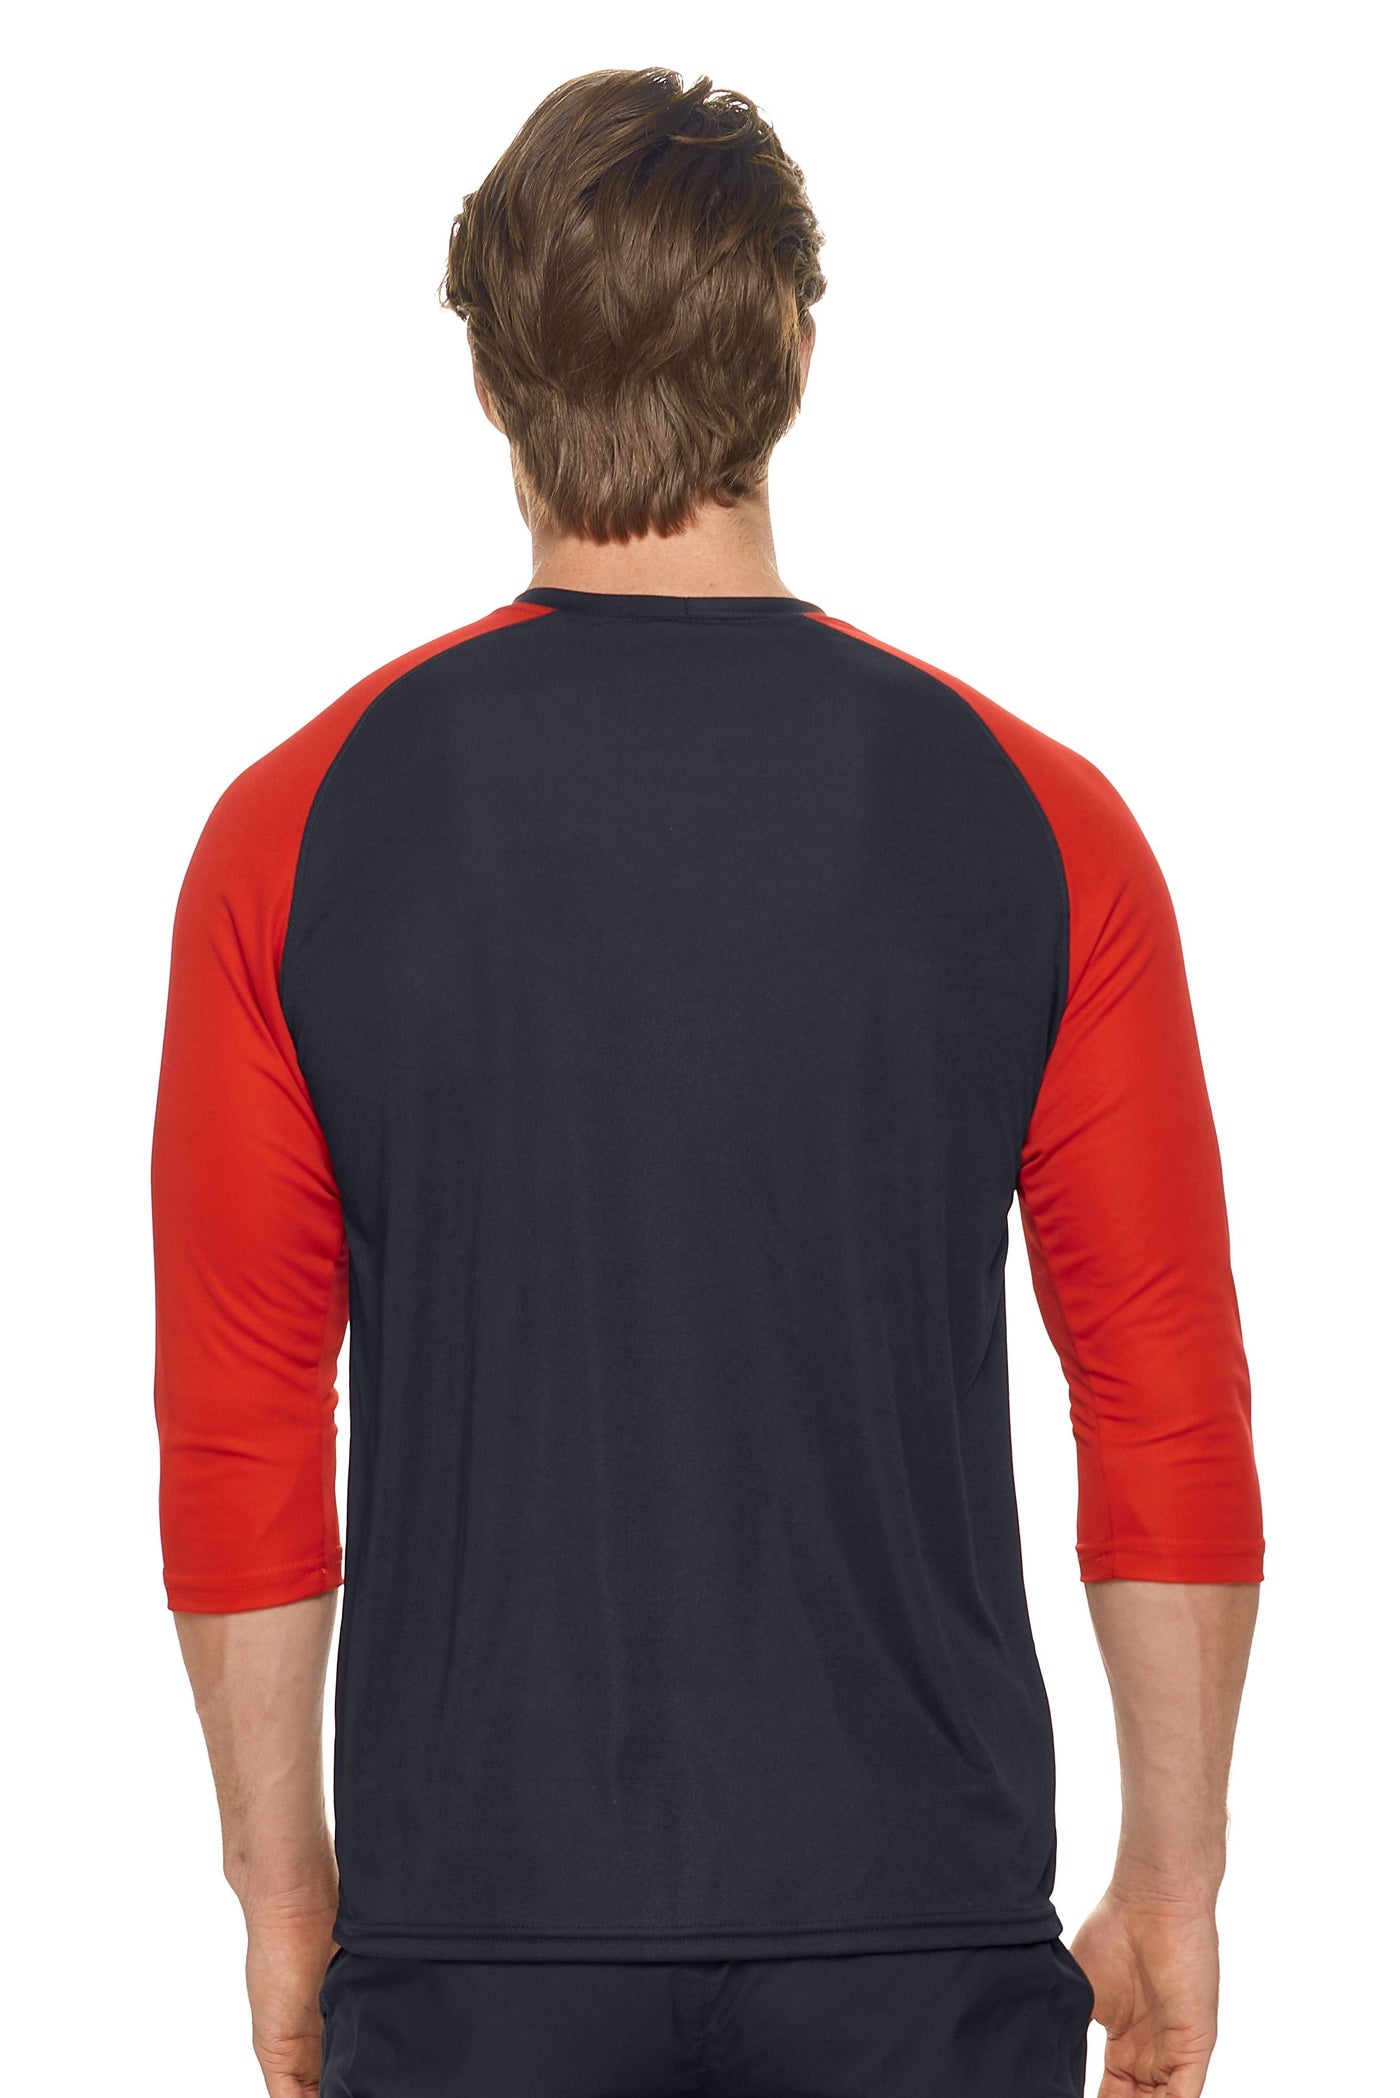 Expert Brand Men's pk MaX™ ¾ Raglan Sleeve Outfitter Crewneck in Black and Red image 3#color_black-red